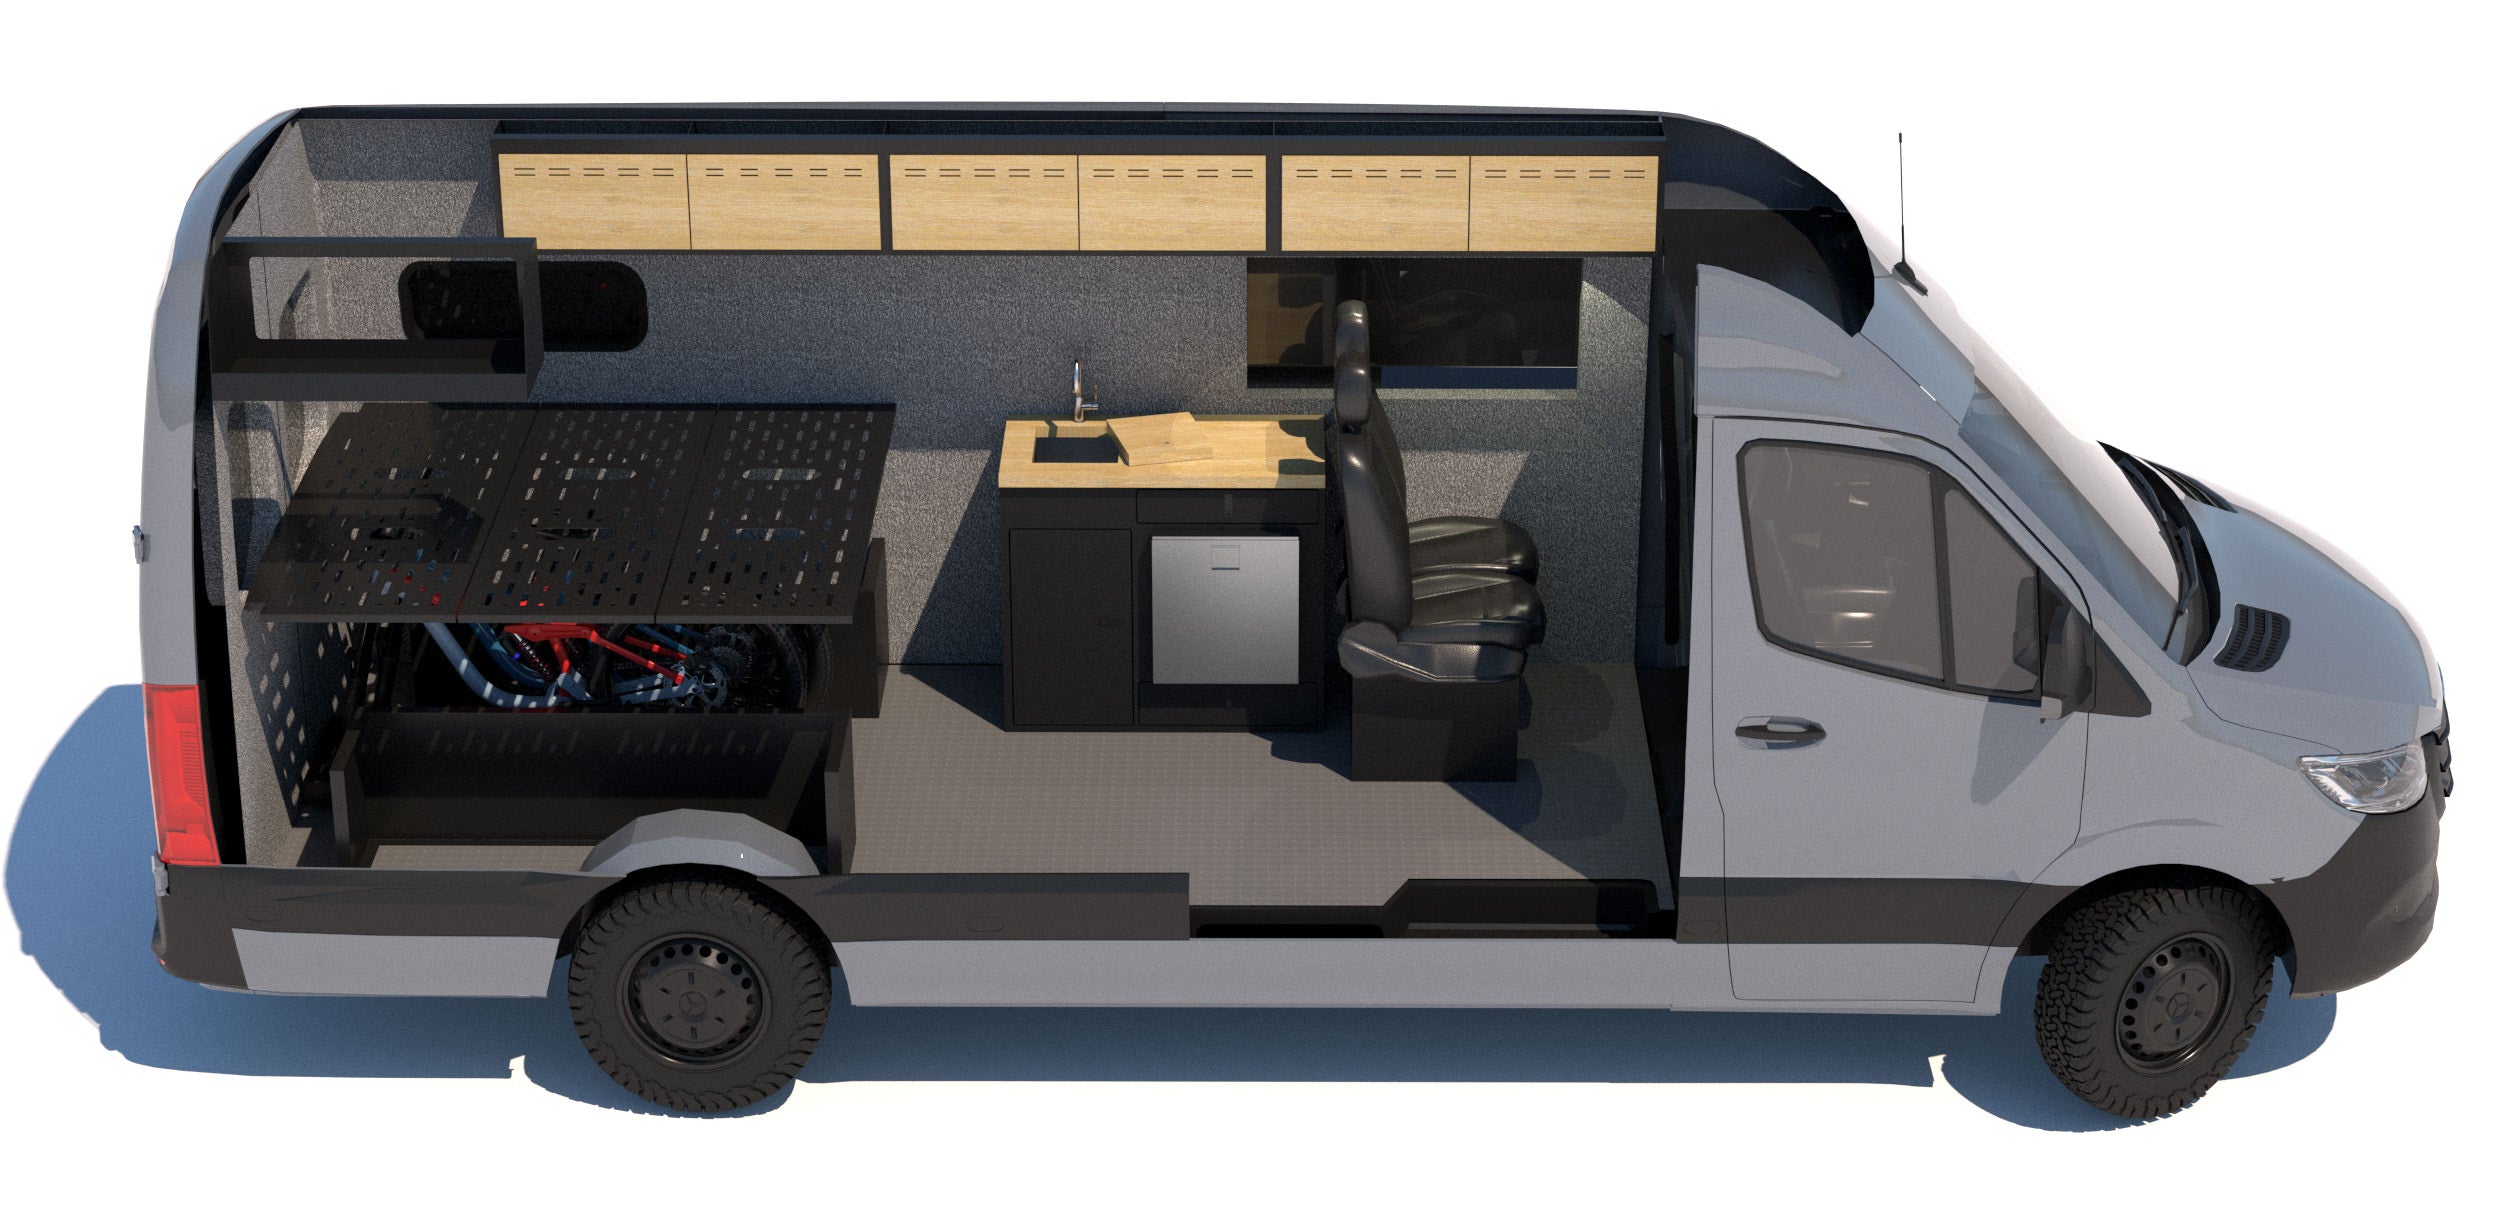 Conversion Layouts for the Sprinter 170 Van